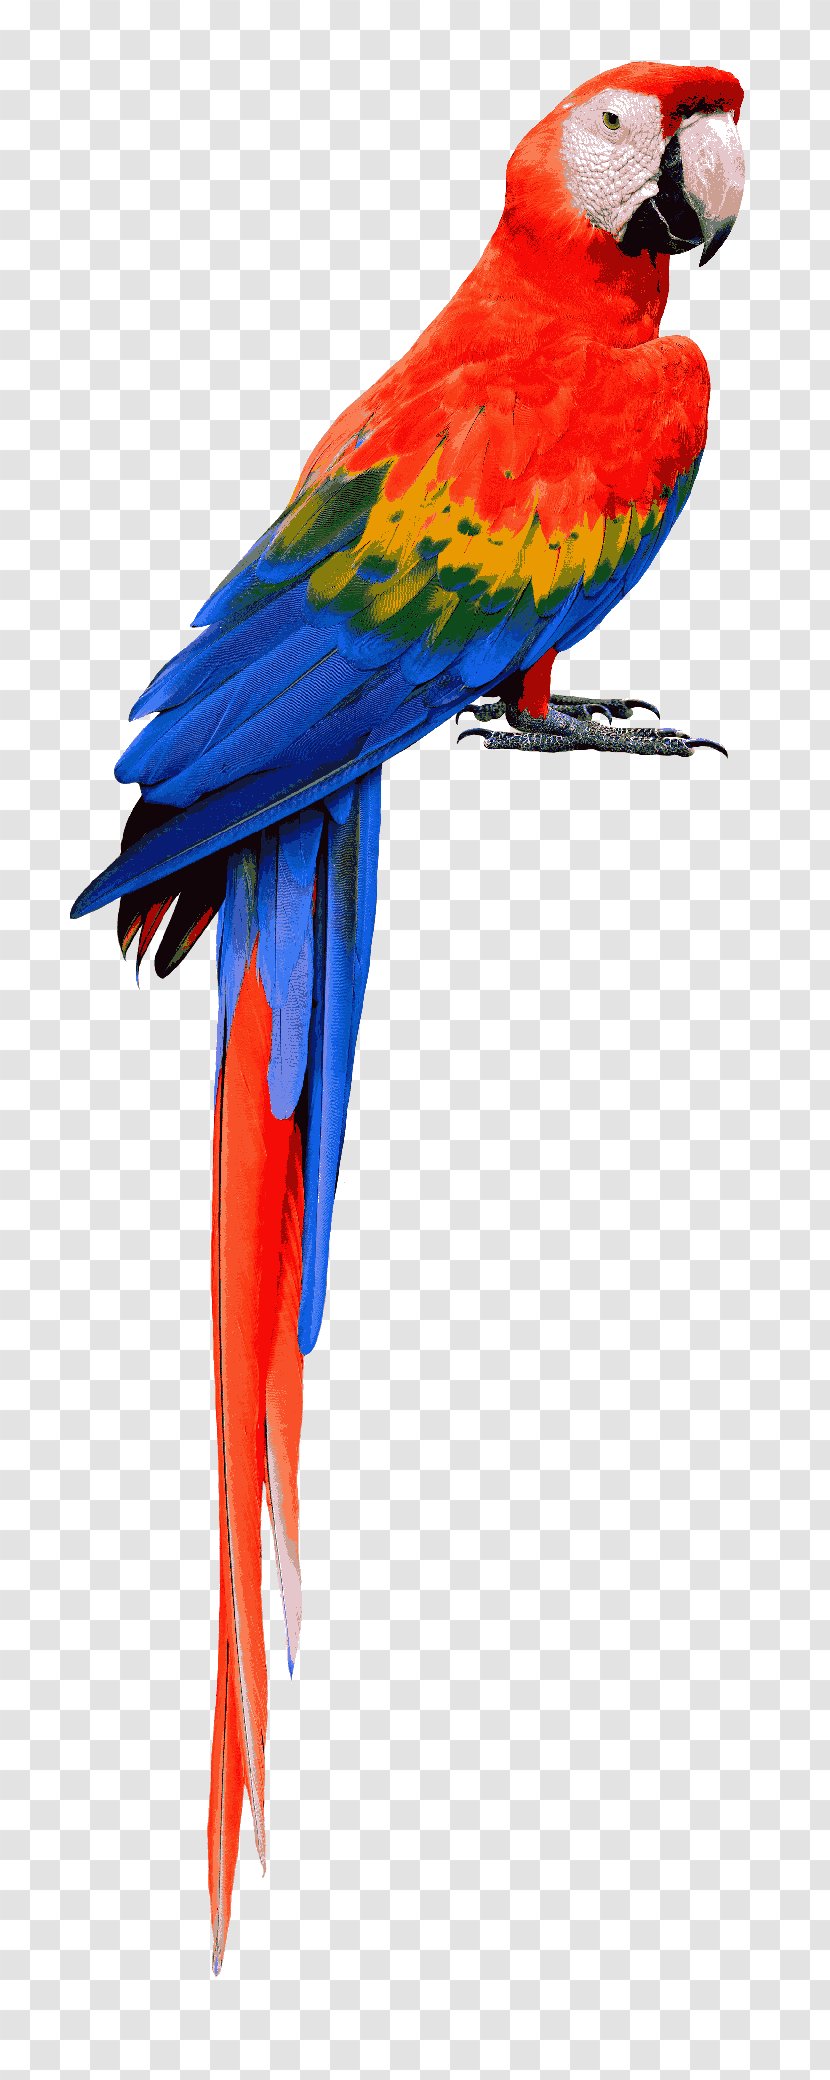 Parrot Bird Scarlet Macaw Blue-and-yellow Transparent PNG